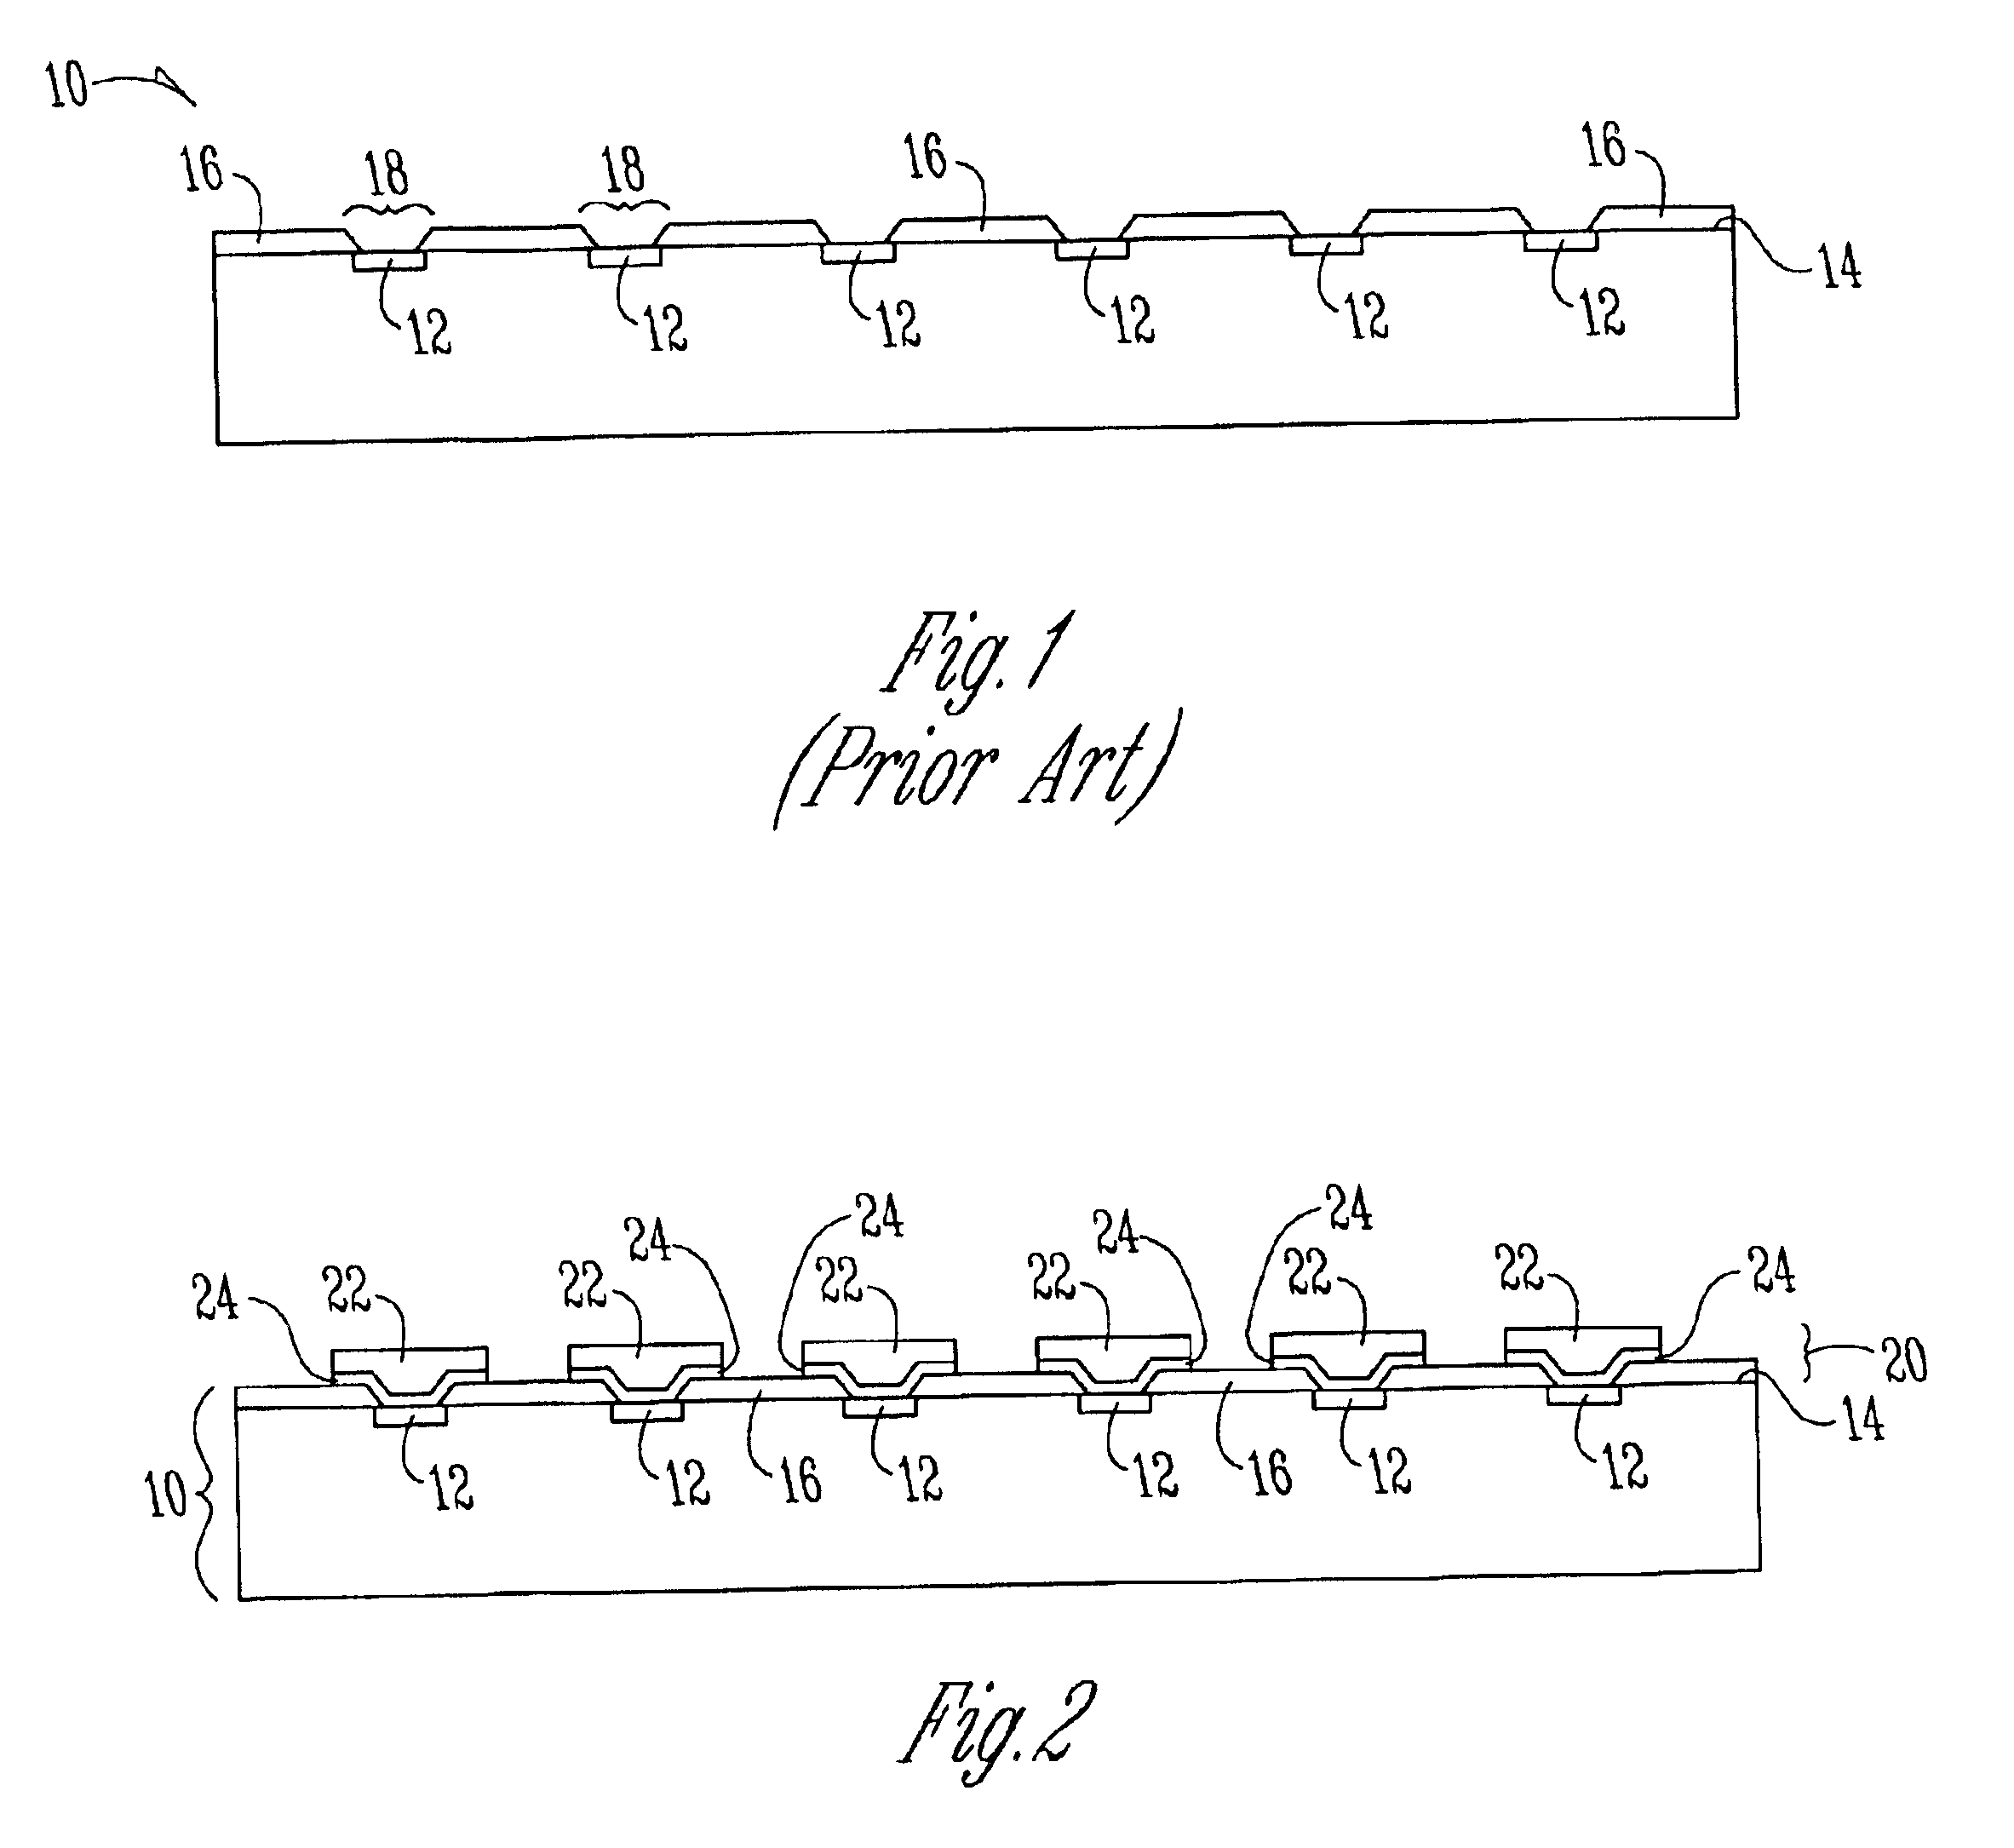 Microelectronic device having signal distribution functionality on an interfacial layer thereof